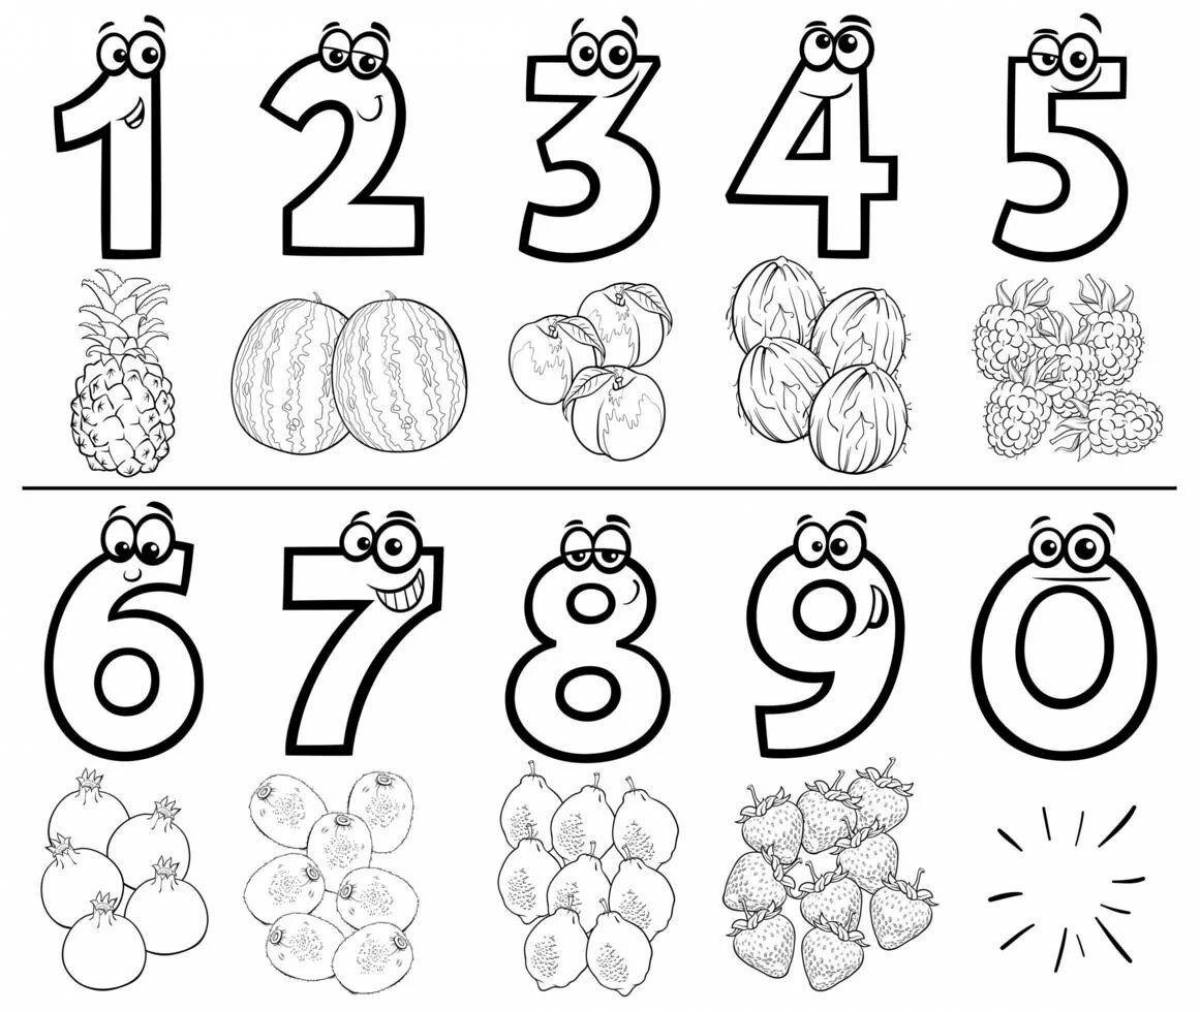 A fun coloring page with combinations of letters and numbers for kids